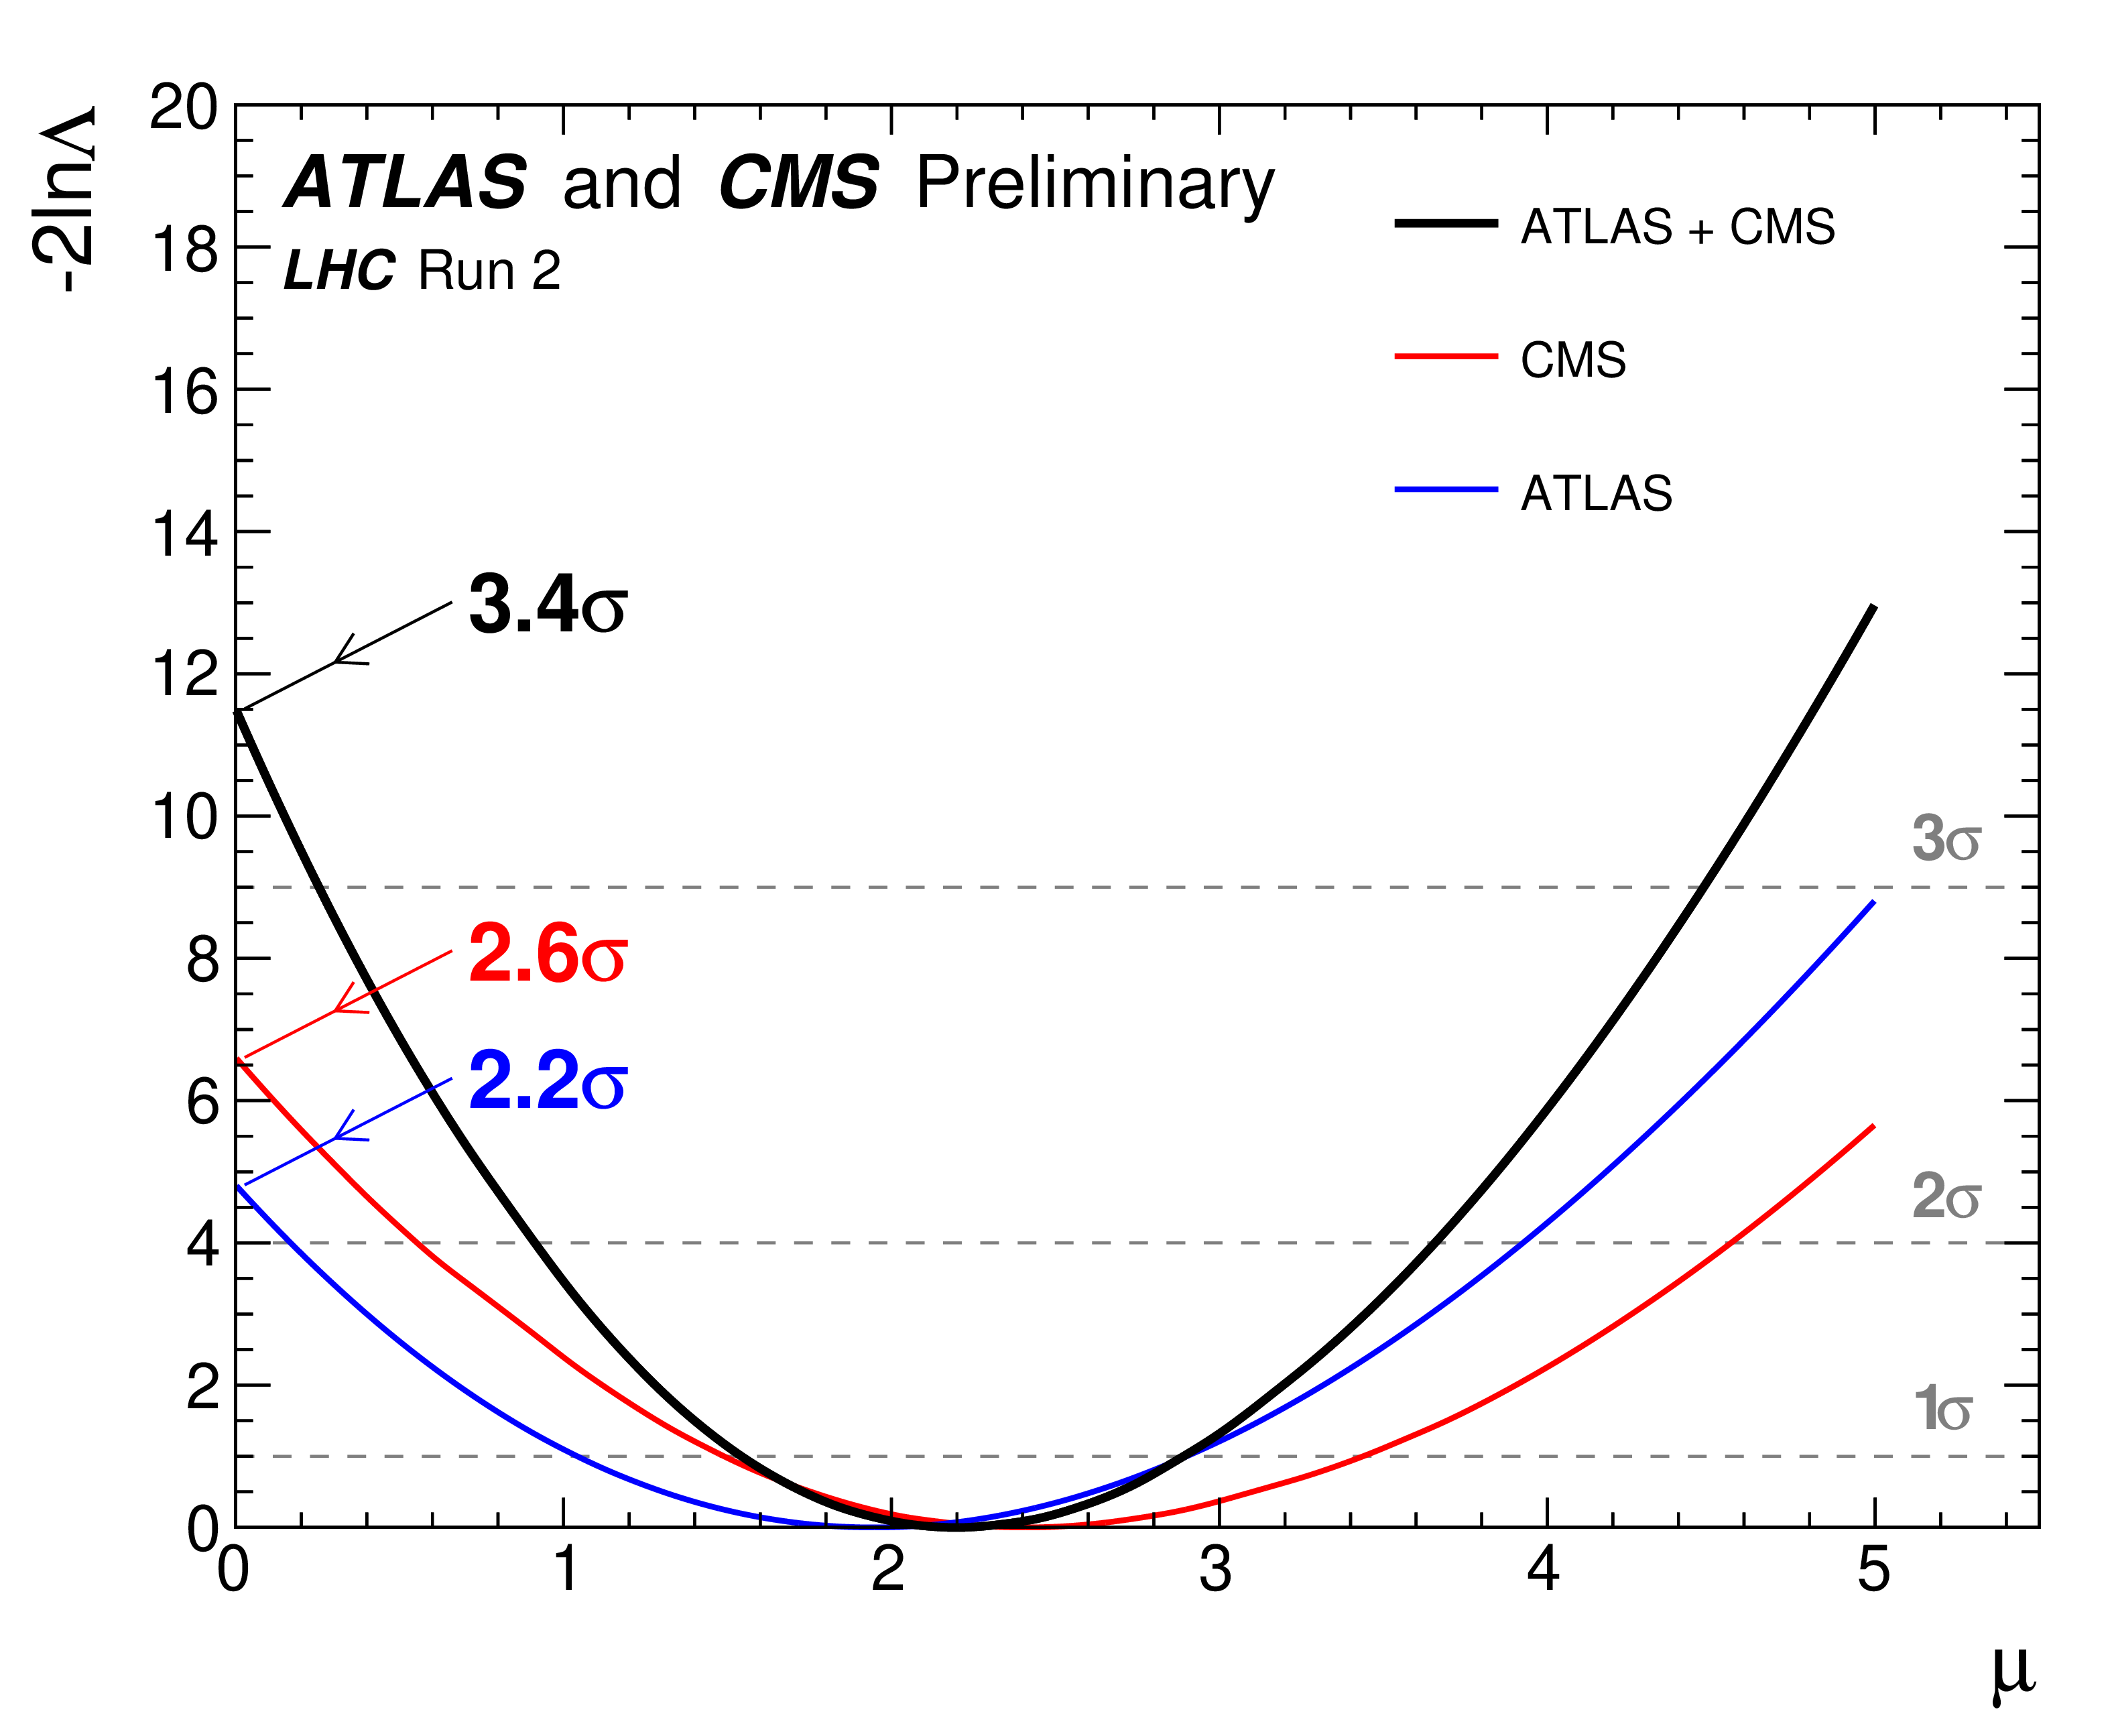 https://cms-results.web.cern.ch/cms-results/public-results/preliminary-results/HIG-23-002/CMS-PAS-HIG-23-002_Figure_002.png